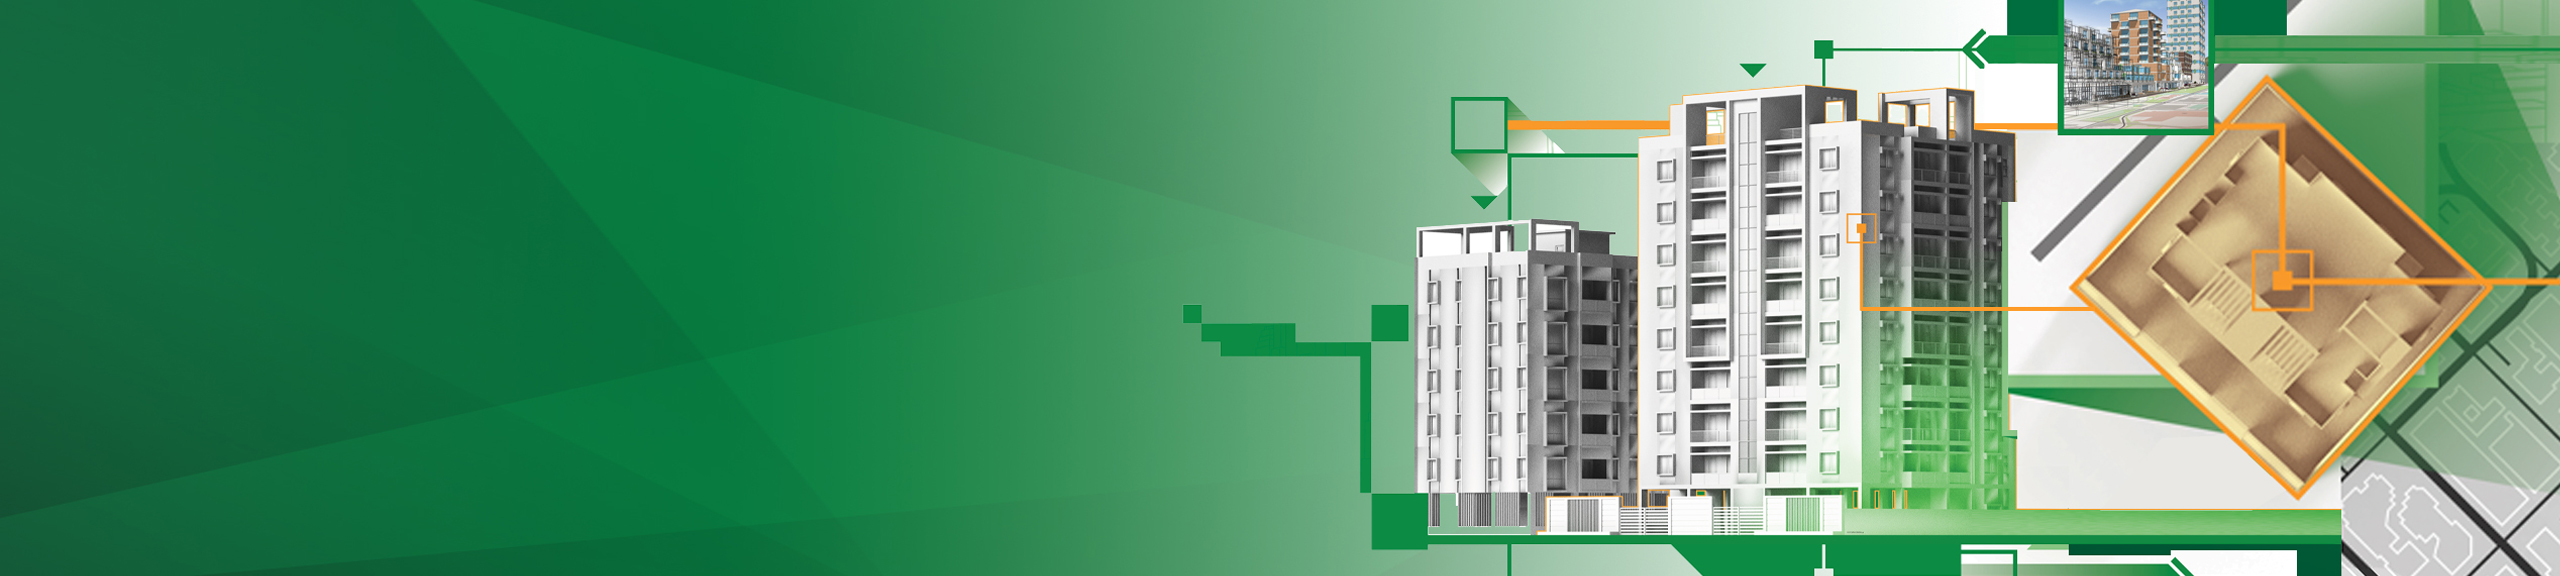 A collage of digital models of a high-rise building overlaid on a green and white background with graphic elements